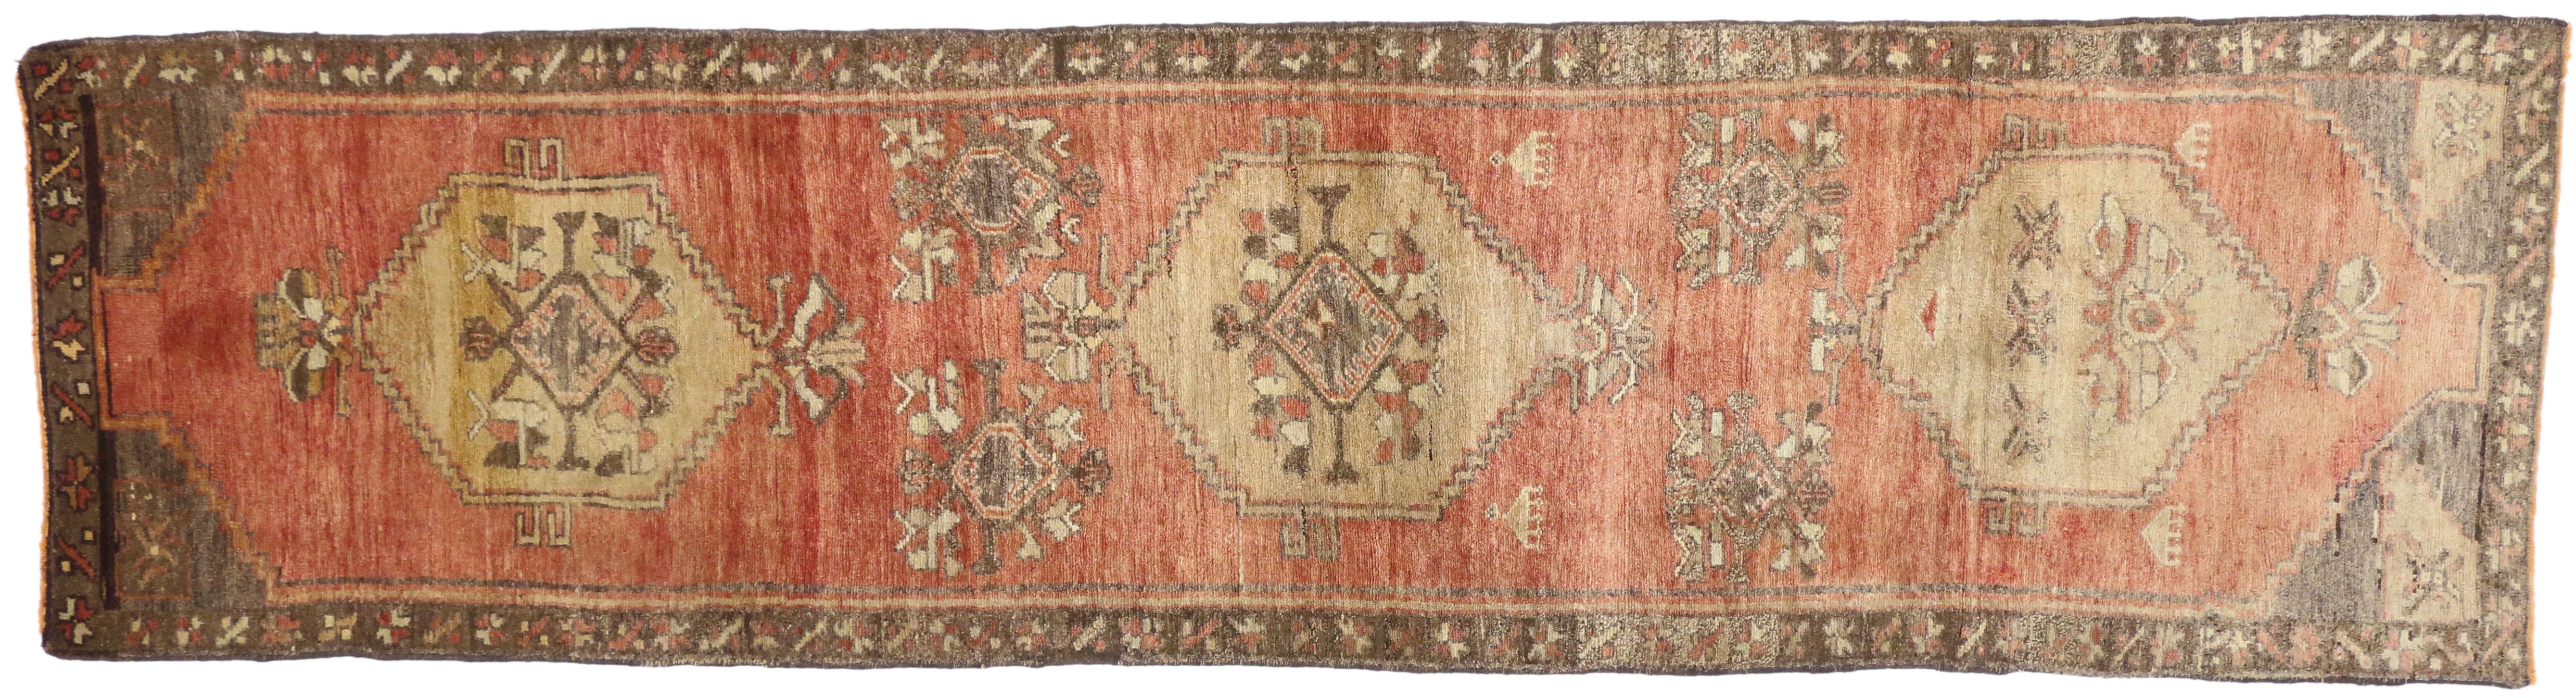 Wool Vintage Turkish Oushak Runner with Modern Rustic Spanish Revival Style